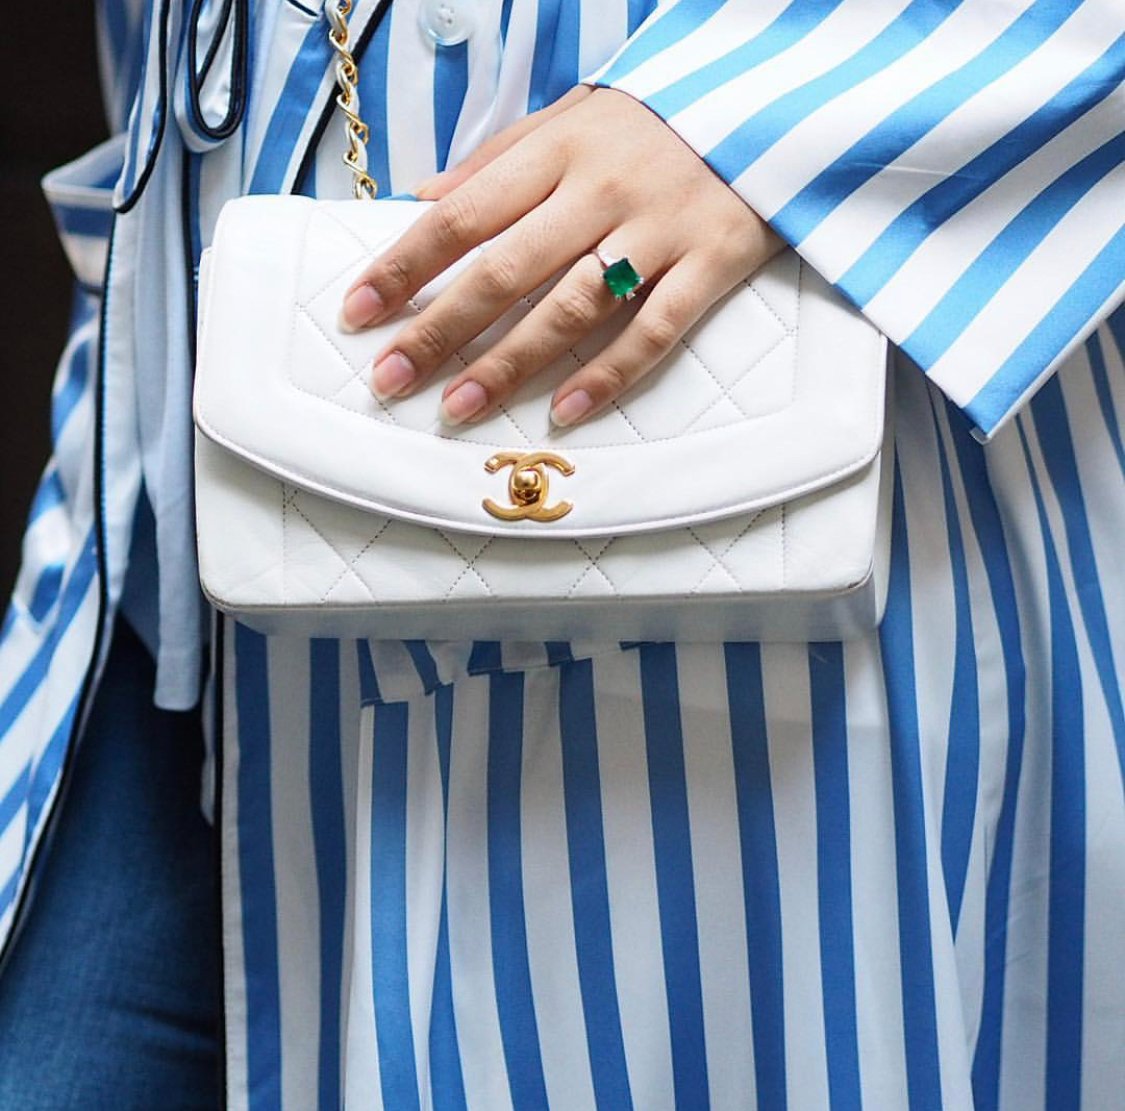 Bella Scored The Best Chanel Bag While Vintage Trawling